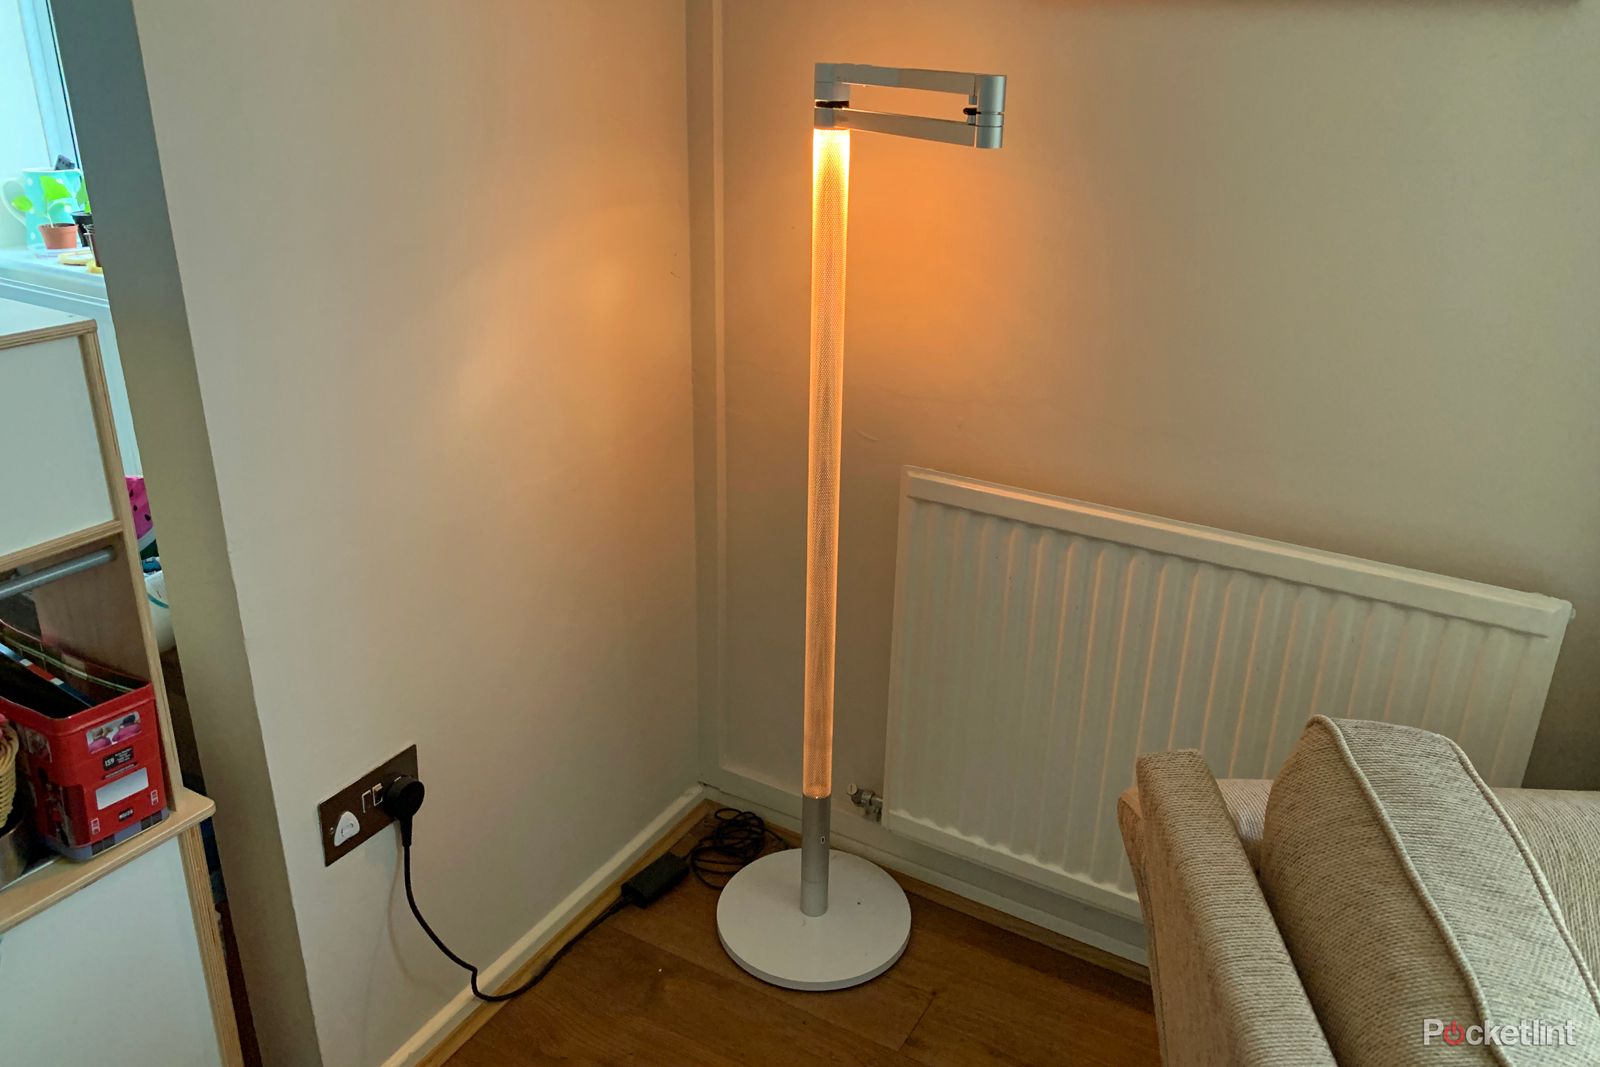 5 Things We Love About Dysons Lightcycle Morph A Light For All Seasons image 1